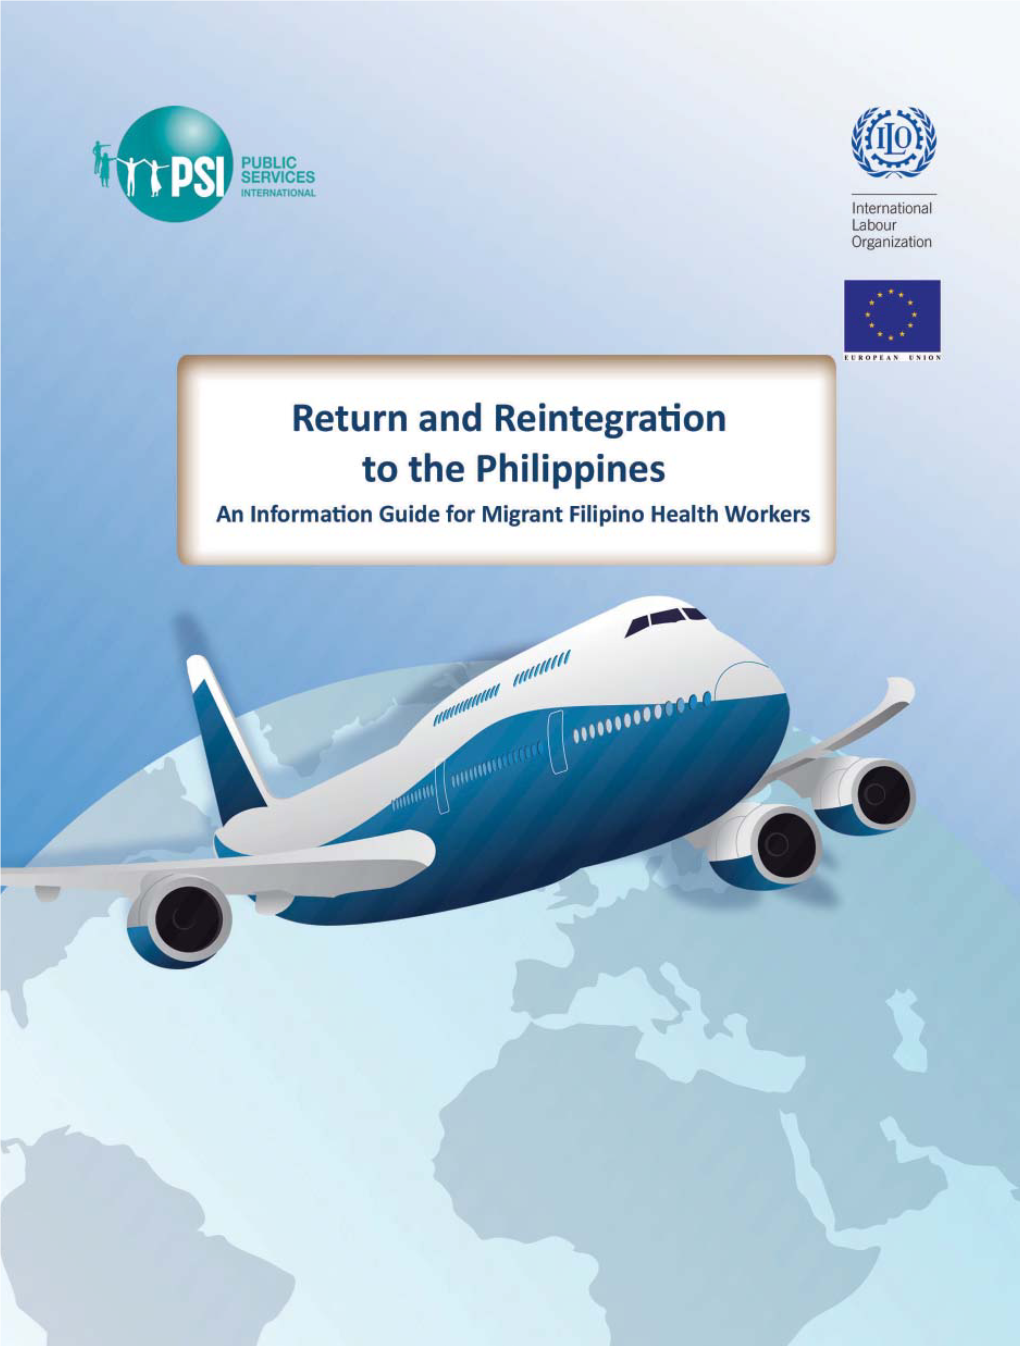 Return and Reintegration to the Philippines an Information Guide for Migrant Filipino Health Workers